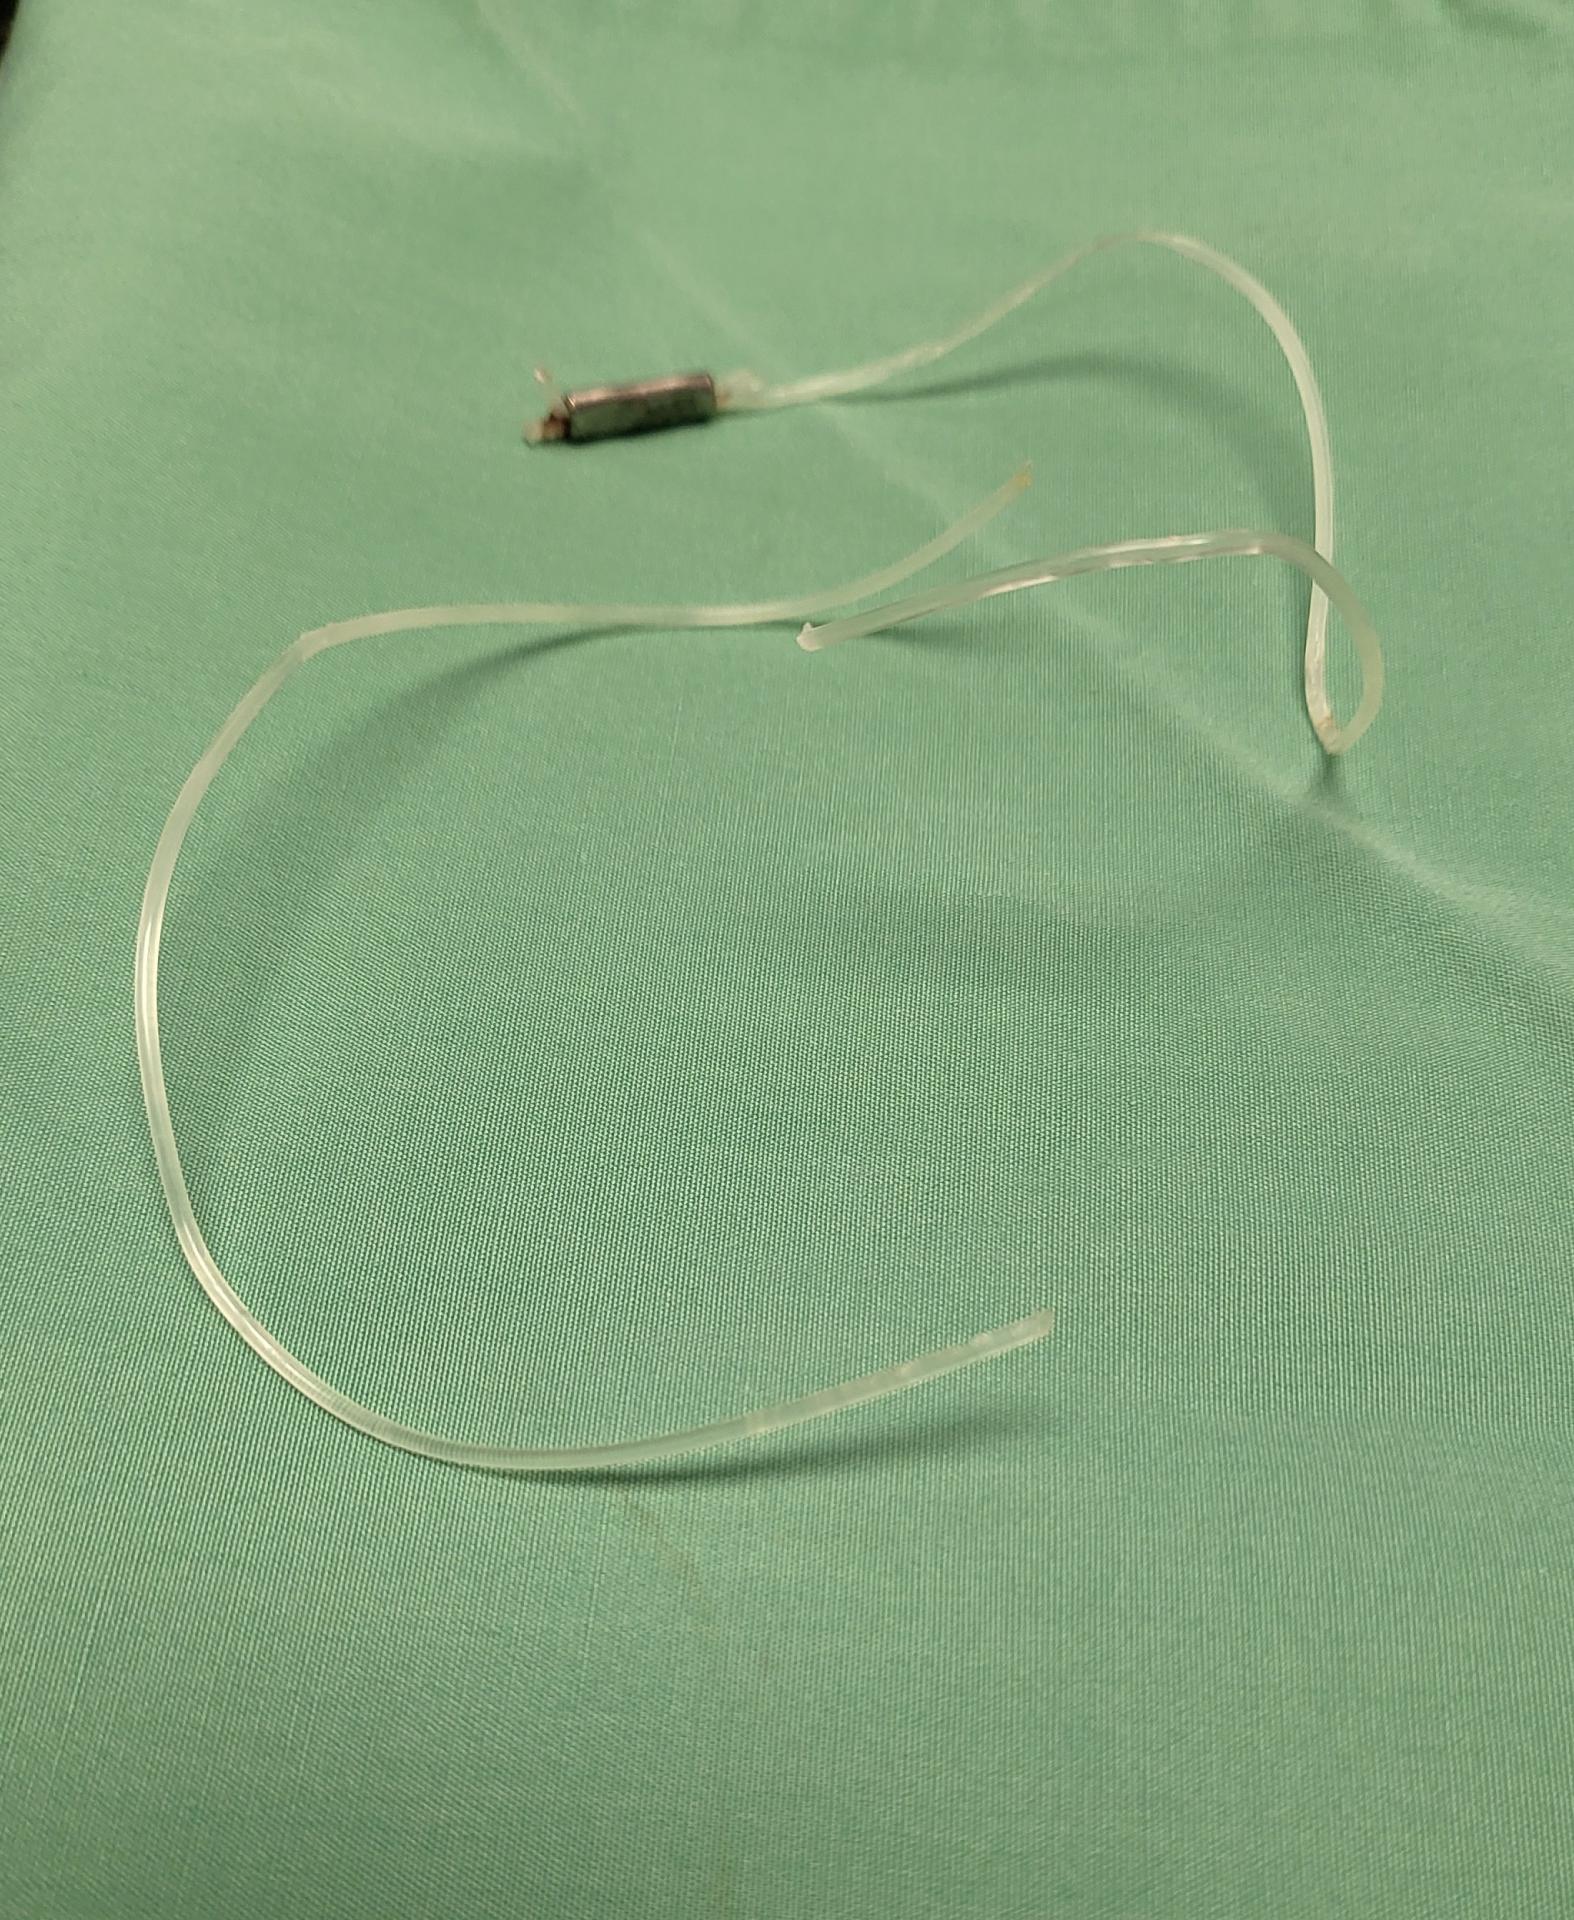 Broken Lateral Suture